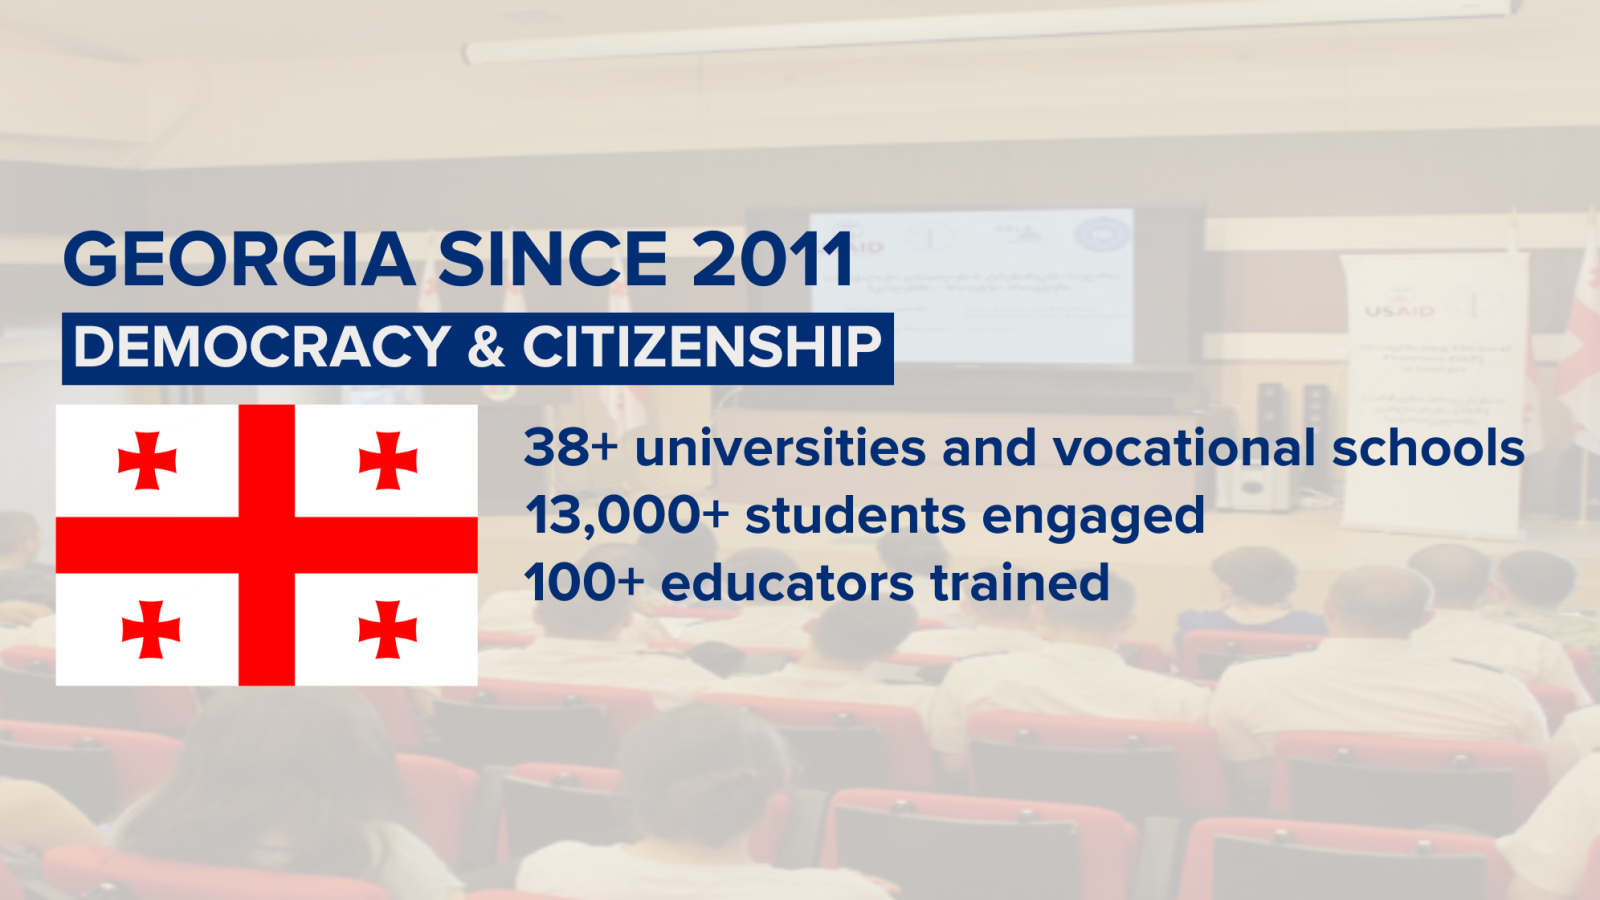 Georgia Since 2011 Democracy & Citizenship, Georgian Flag, 38+ universities and vocational schools, 12k+ students engaged, 100+ educators trained